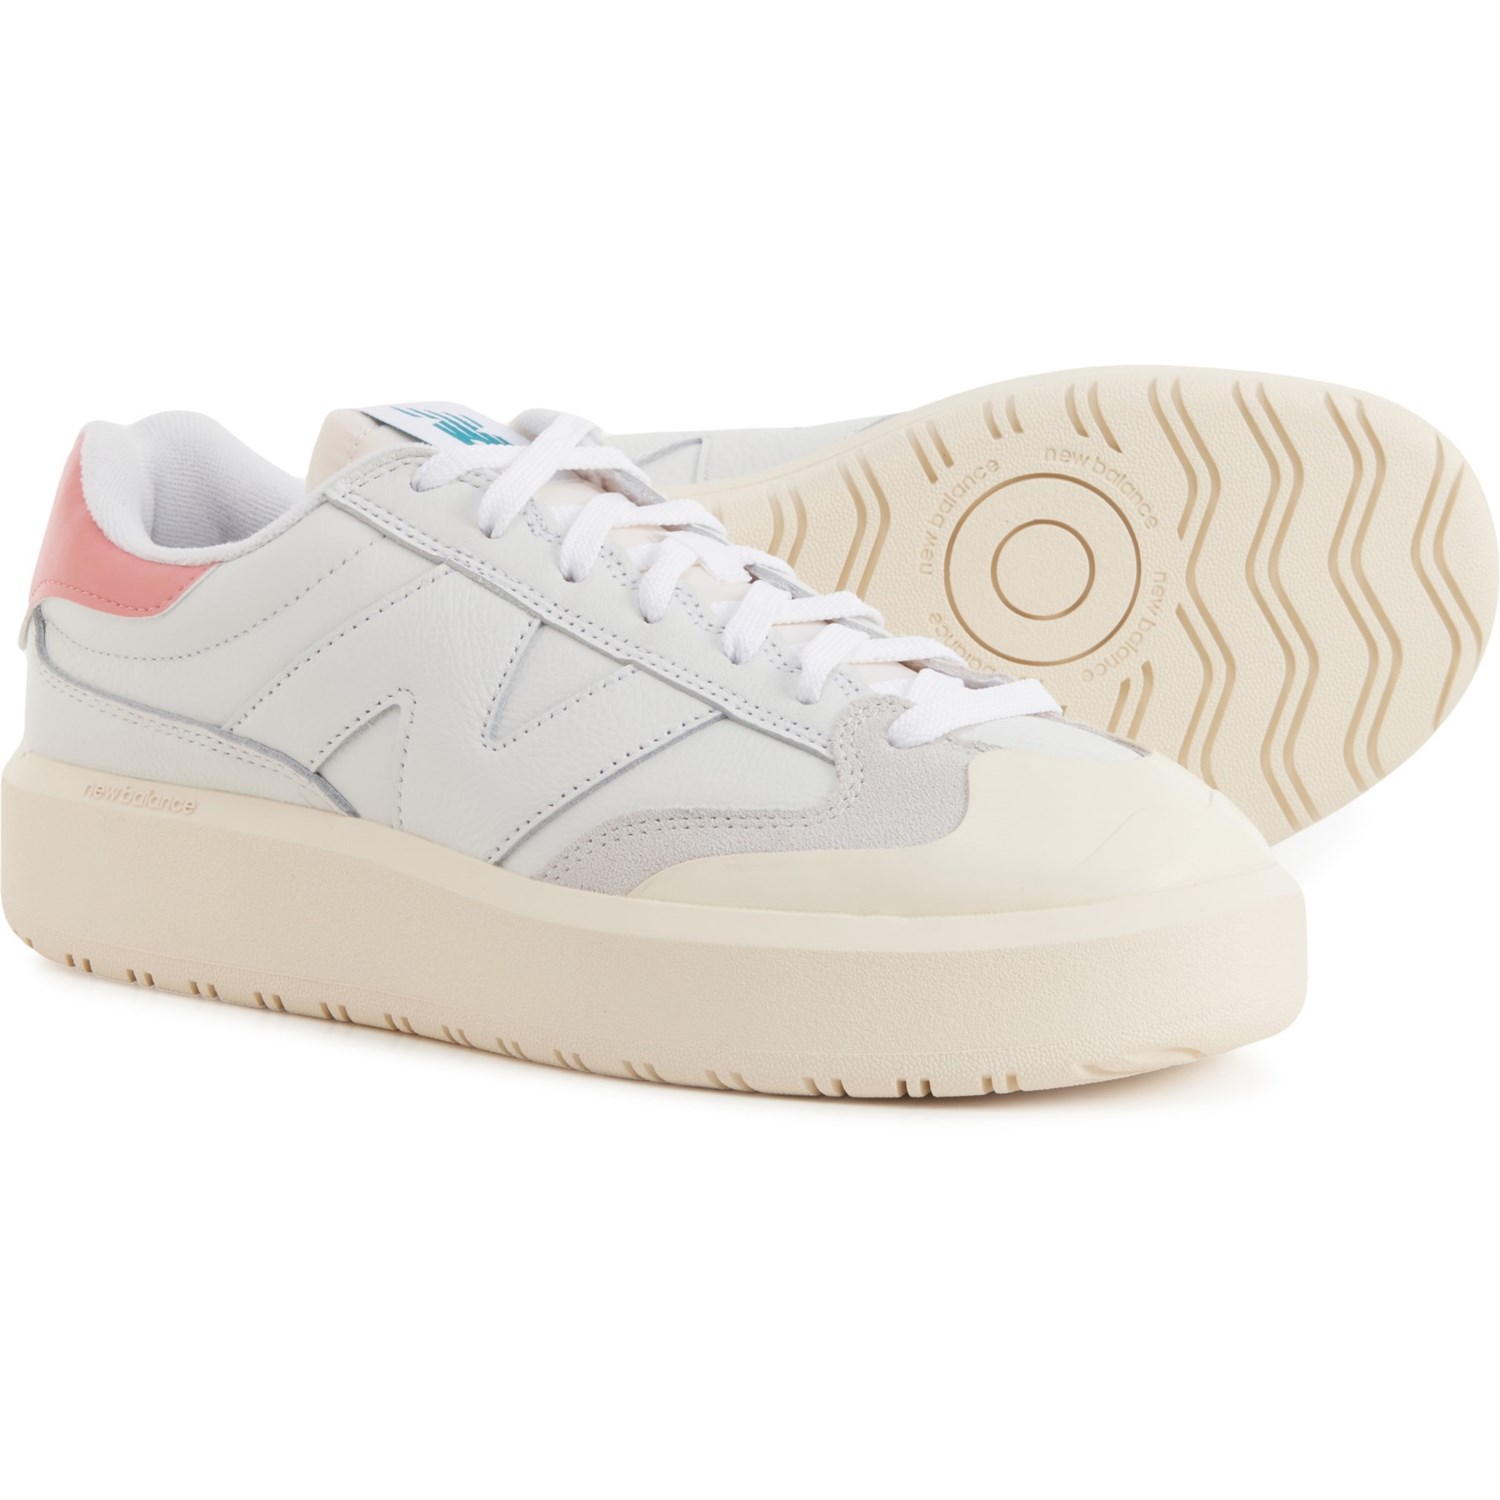 New Balance CT302 Sneakers - Leather (For Men & Women)